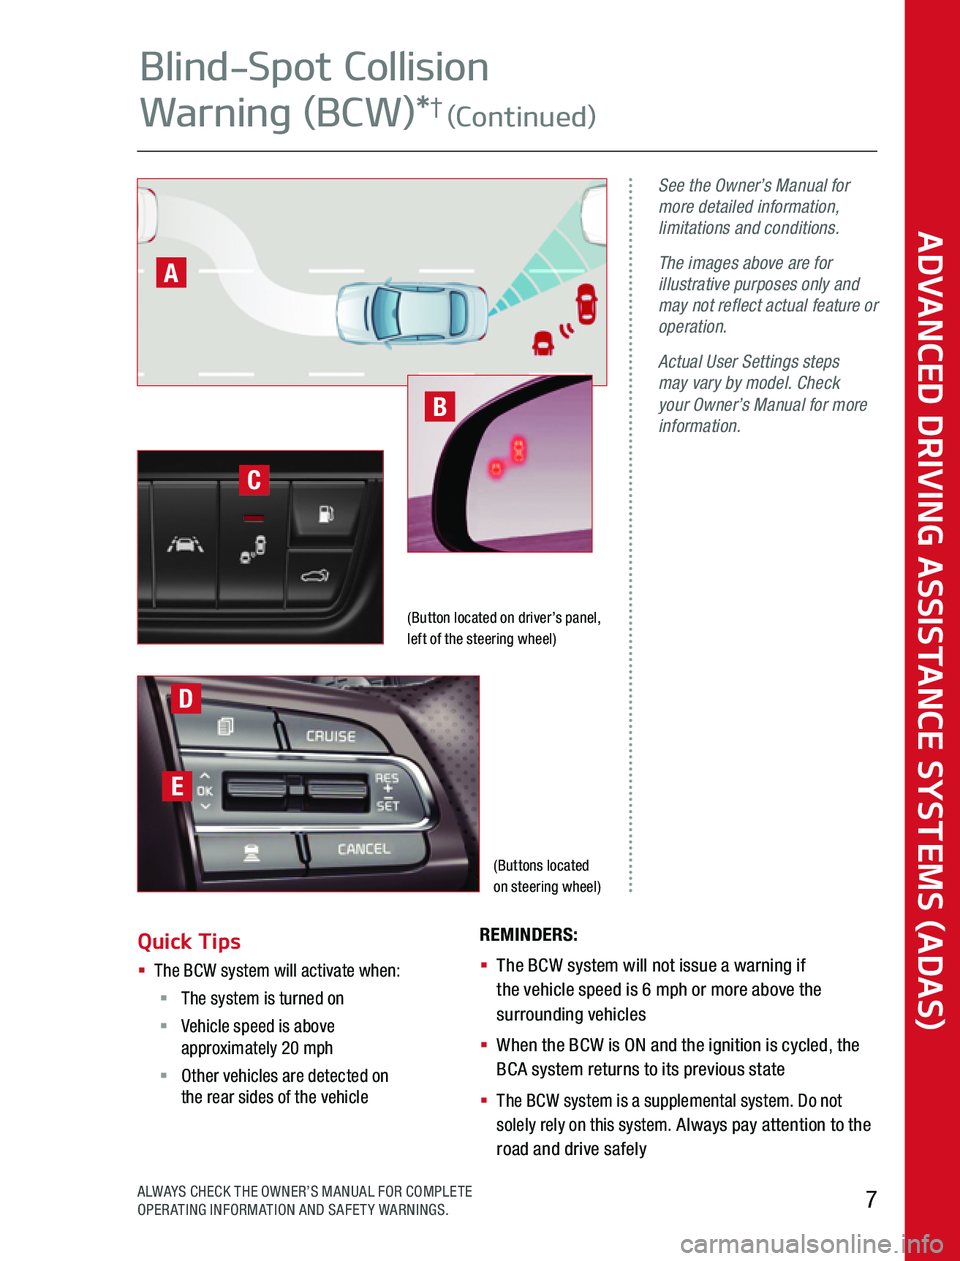 KIA SORENTO 2020  Advanced Driving Assistance System (Buttons located  on steering wheel)
See the Owner’s Manual for more detailed information, limitations and conditions.
The images above are for illustrative purposes only and may not reflect actual 